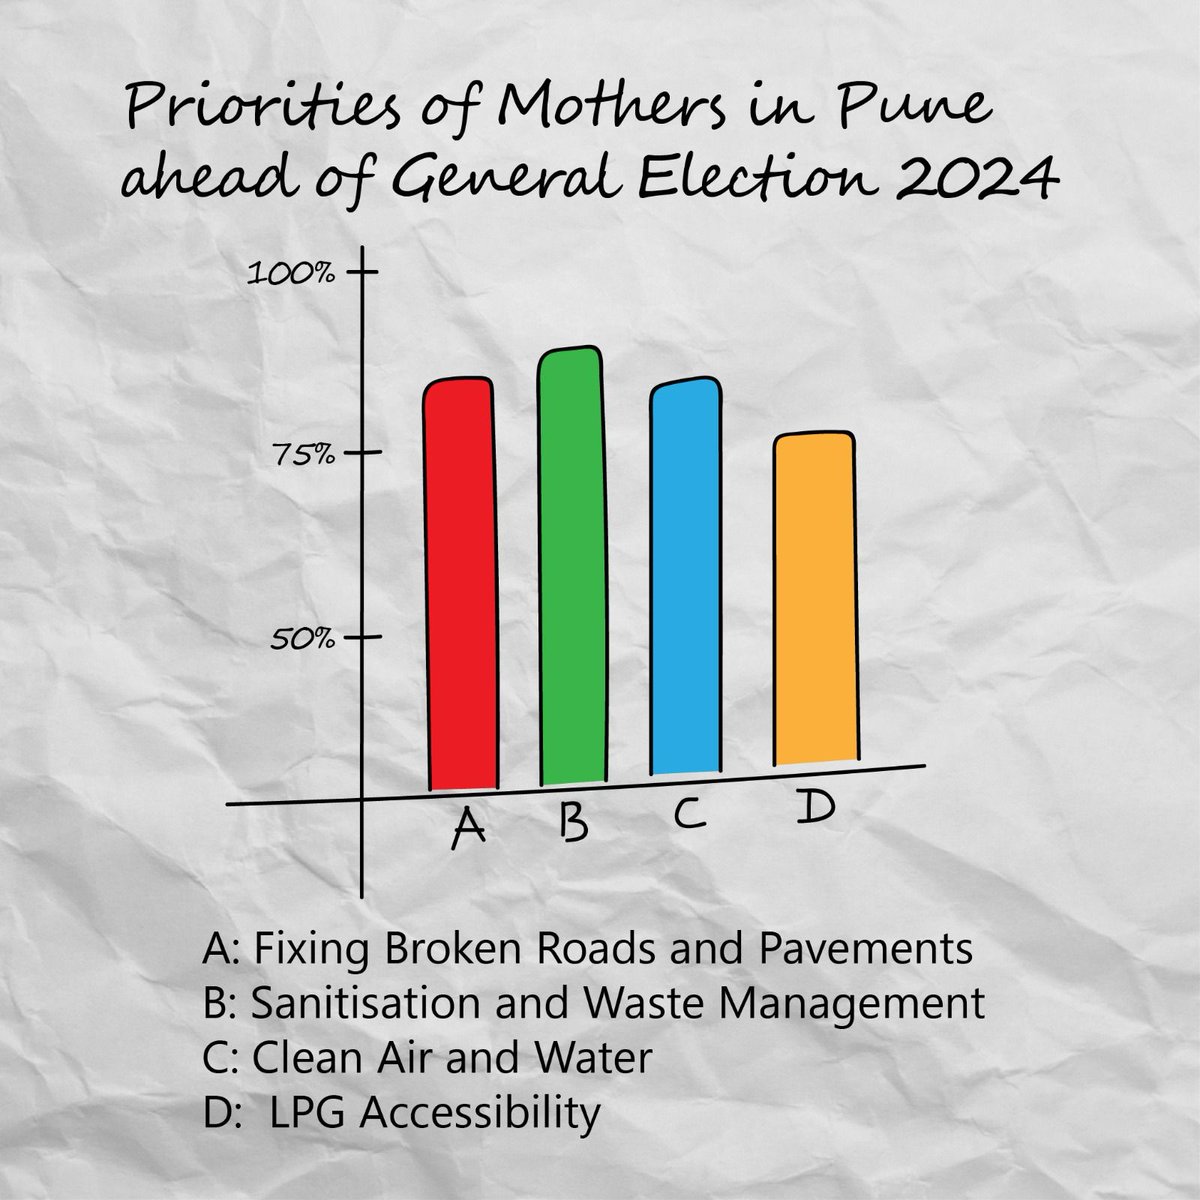 Mothers in #Pune urge quick fixes for roads, sanitation/waste management, air/water quality, and LPG costs.
Survey: pdflink.to/b03ef62d/

#SwachhHawaChunav #CleanAirElections @Warriormomsin @BhavreenMK  @mhemachari 

@pulse_pune @mataonline @htpune @IndianExpress @fpjindia